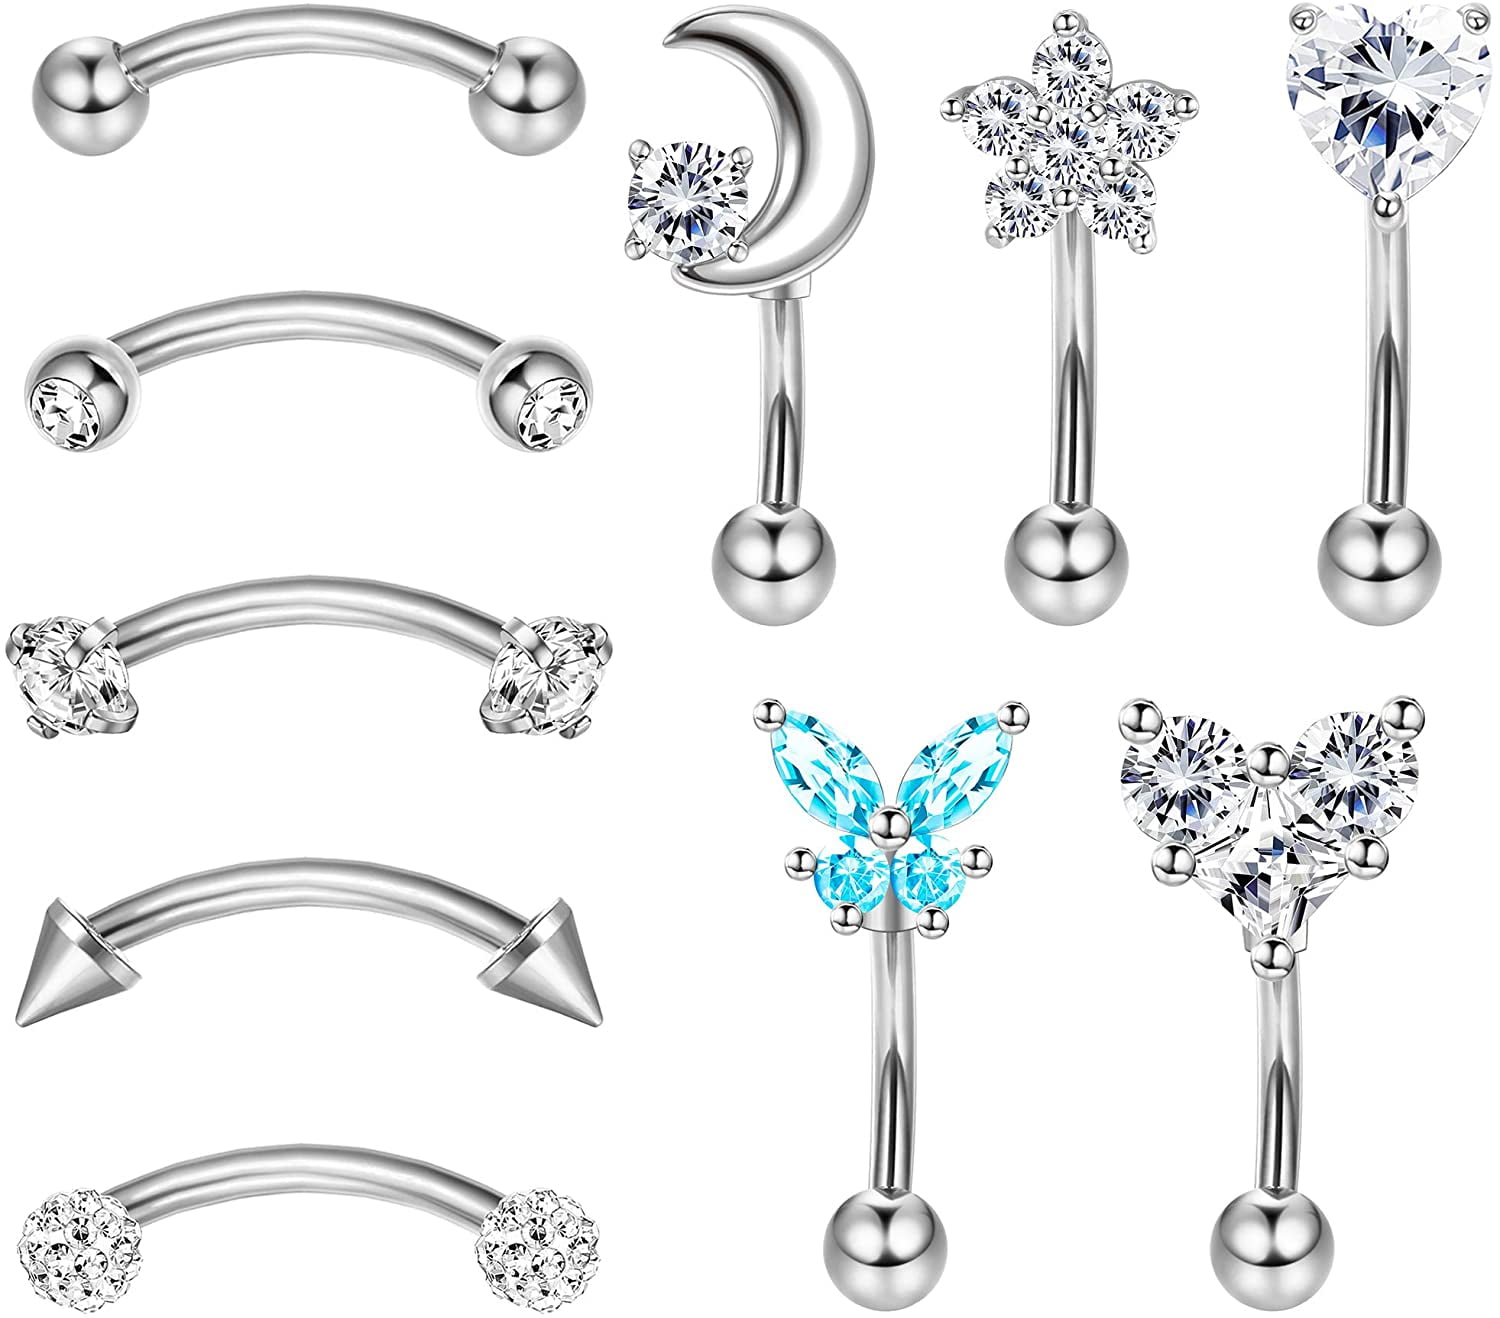 Hanpabum 8 Pairs Stainless Steel Helix Cartilage Tragus Stud Earrings Flower Feather Star CZ Barbell Piercing Earrings 16G 18G